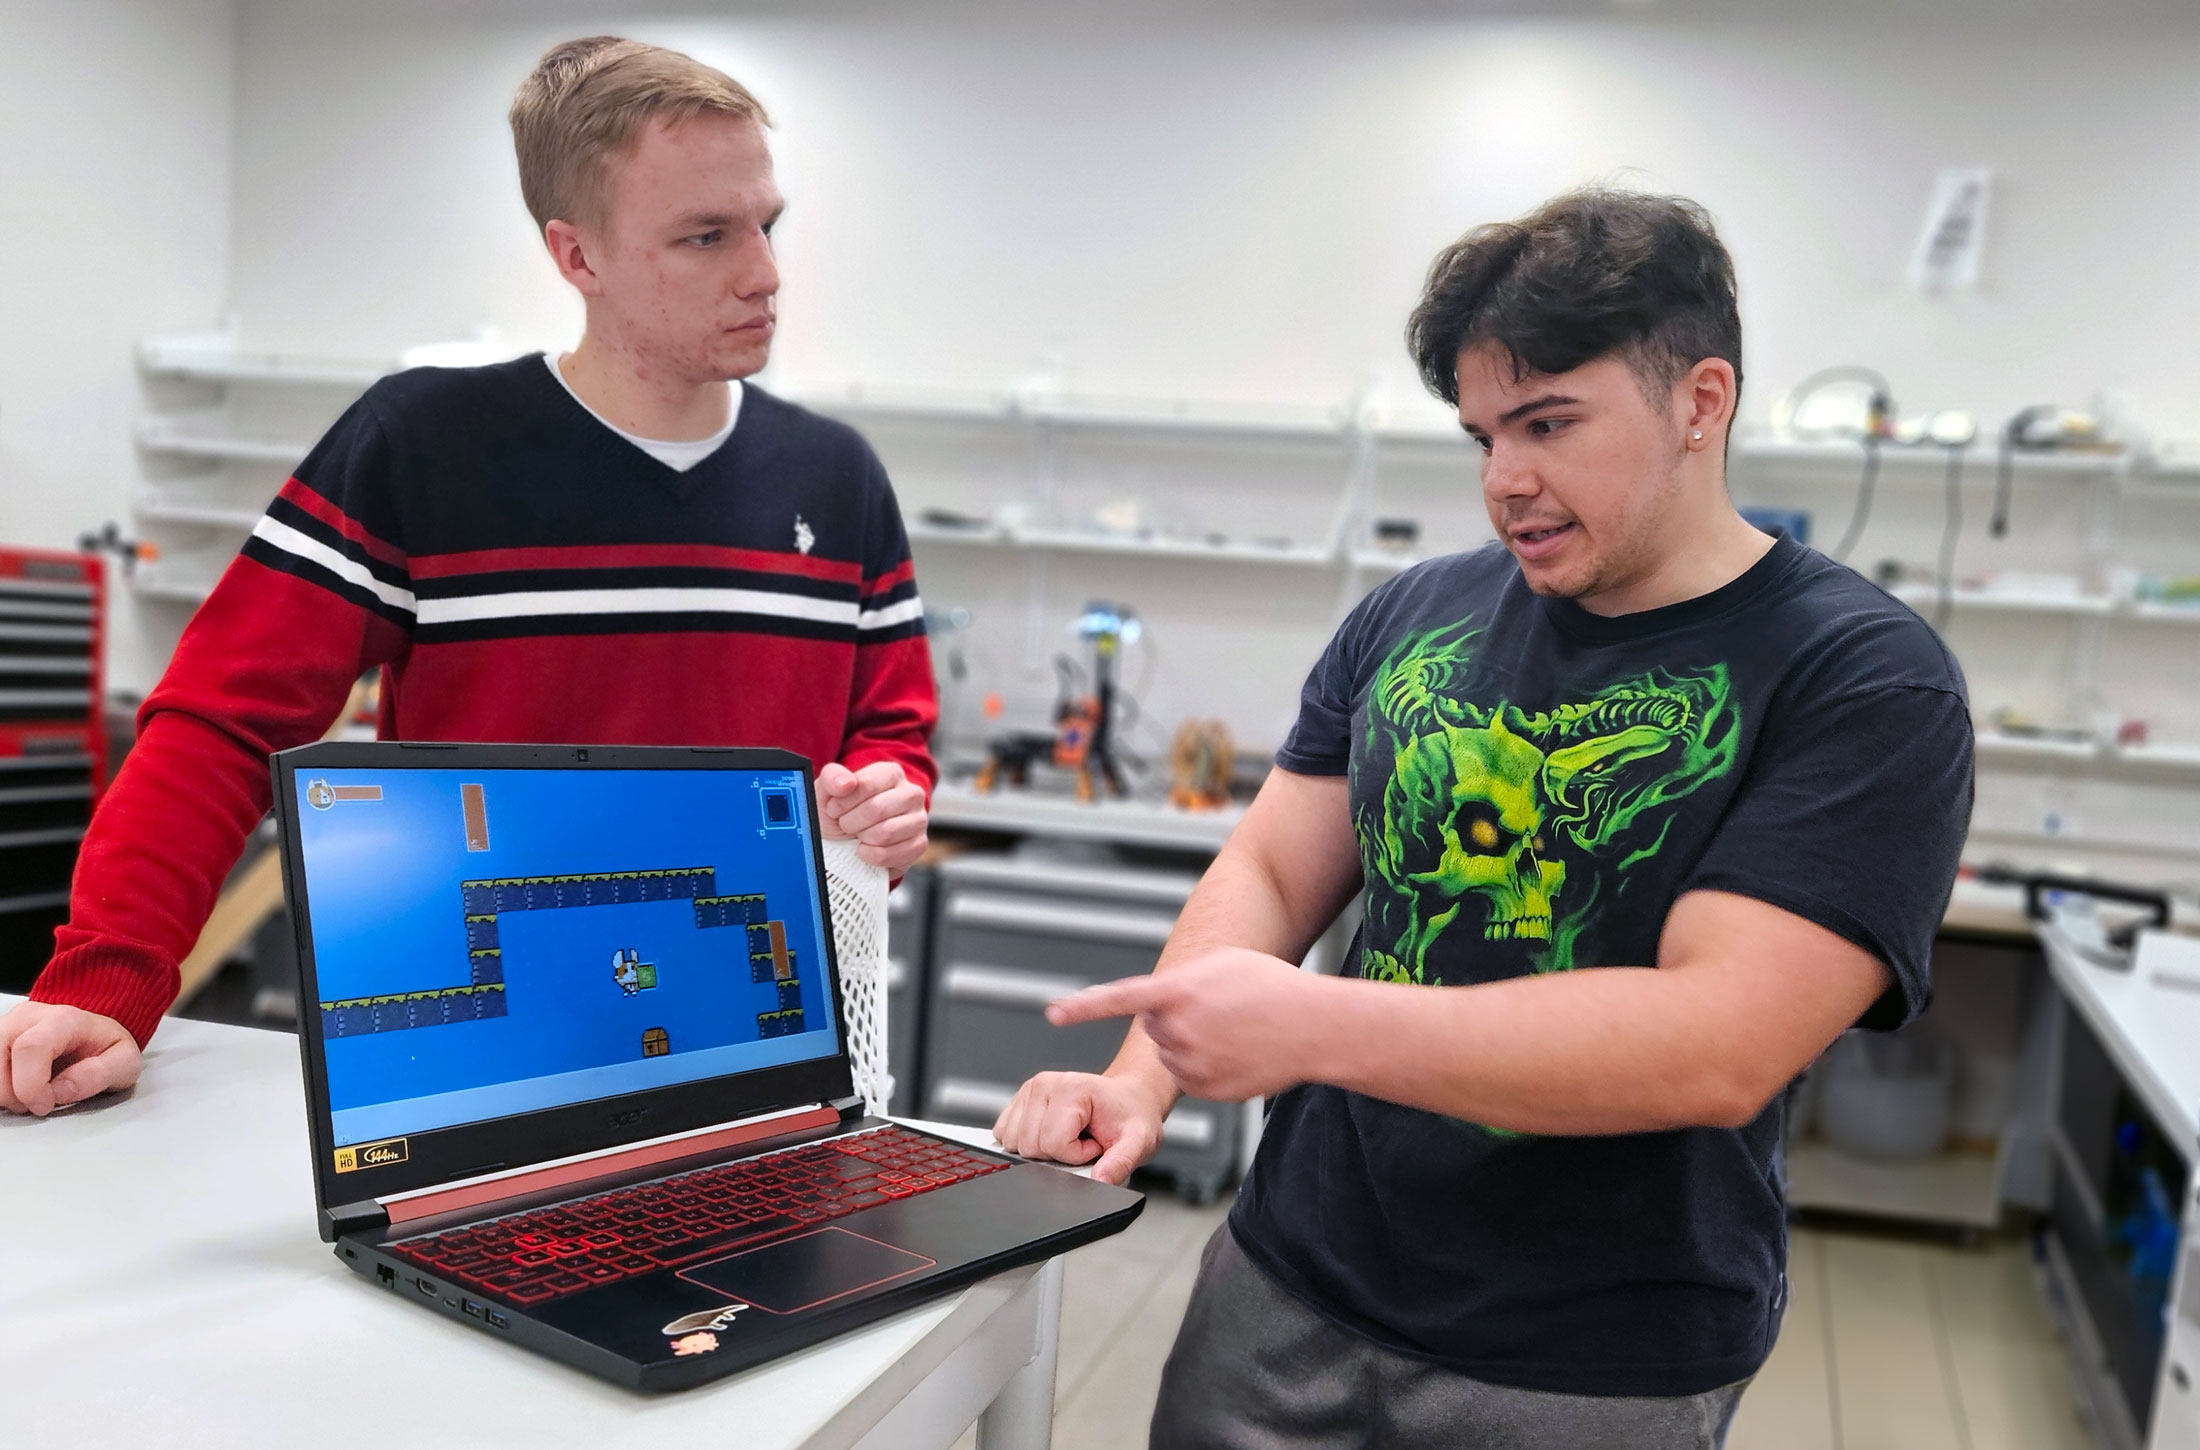 Capstone team gamifies child respiratory care with underwater exploration game